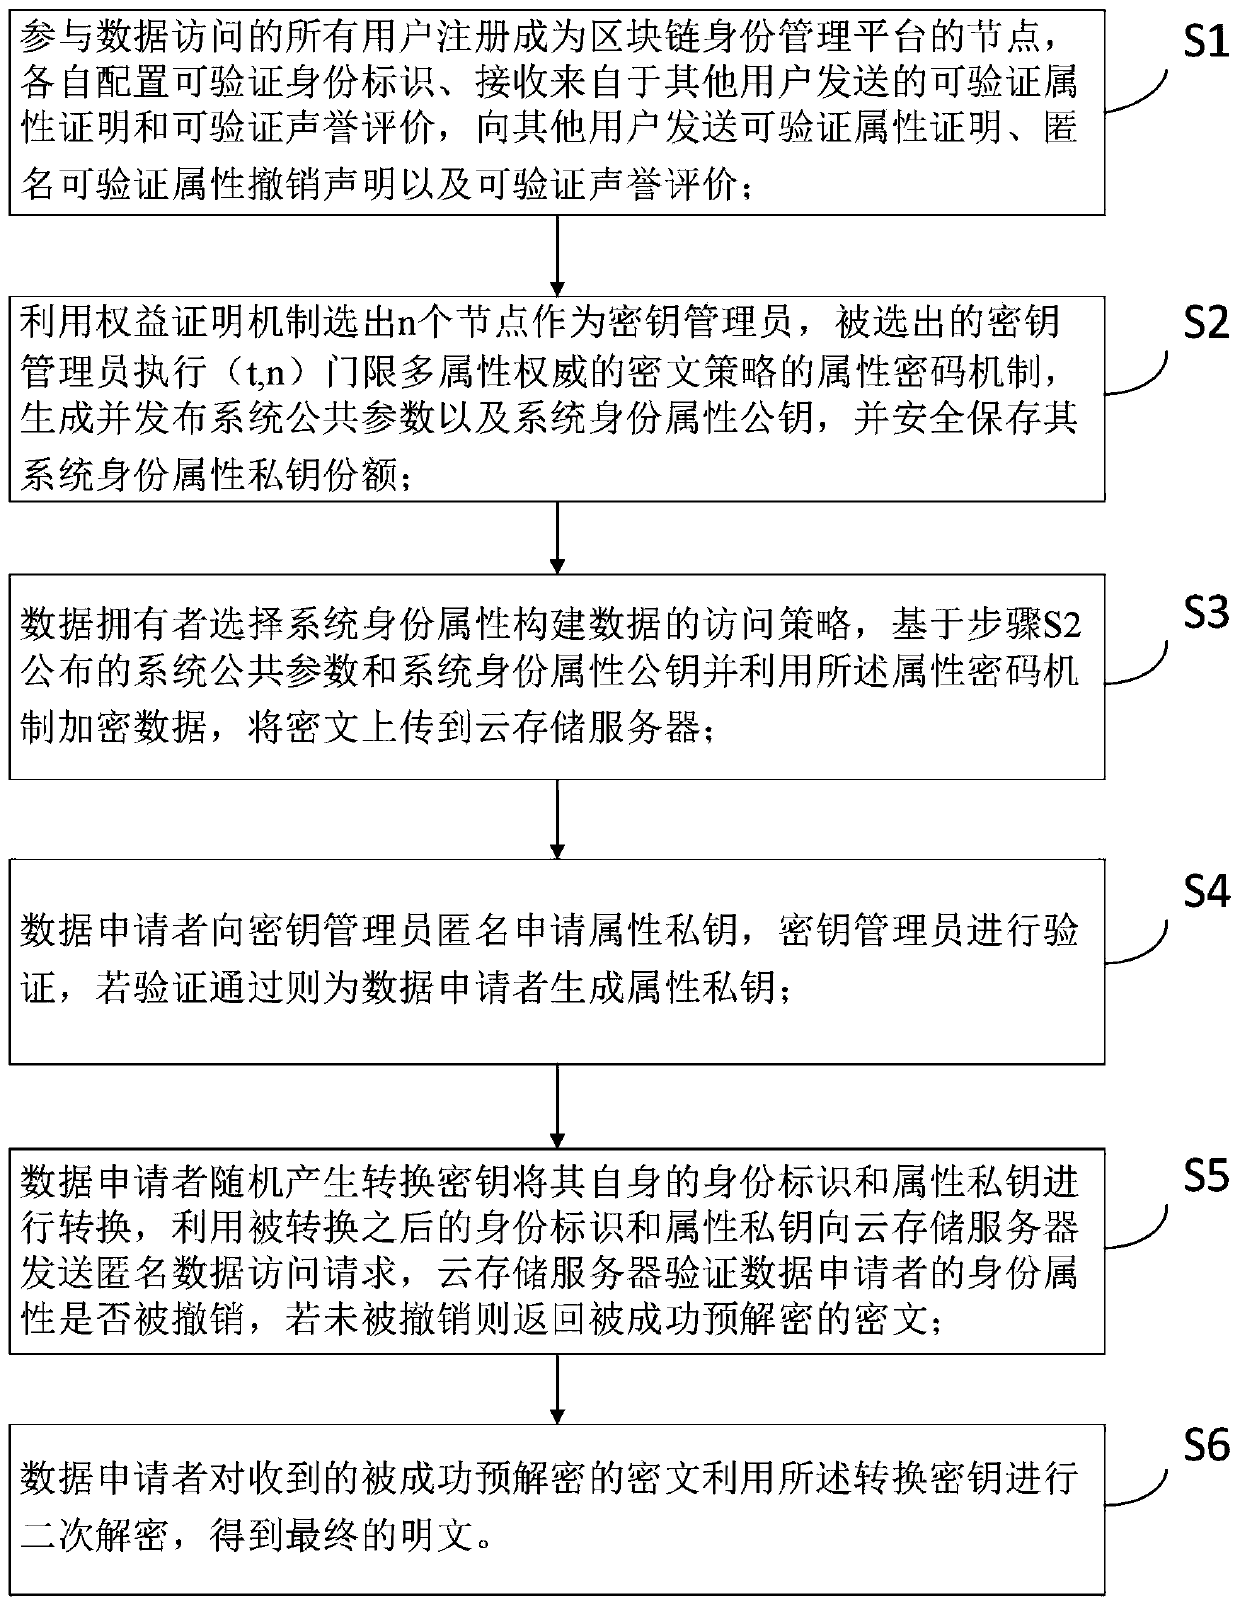 Data access control method and system in large-scale cloud storage based on block chain